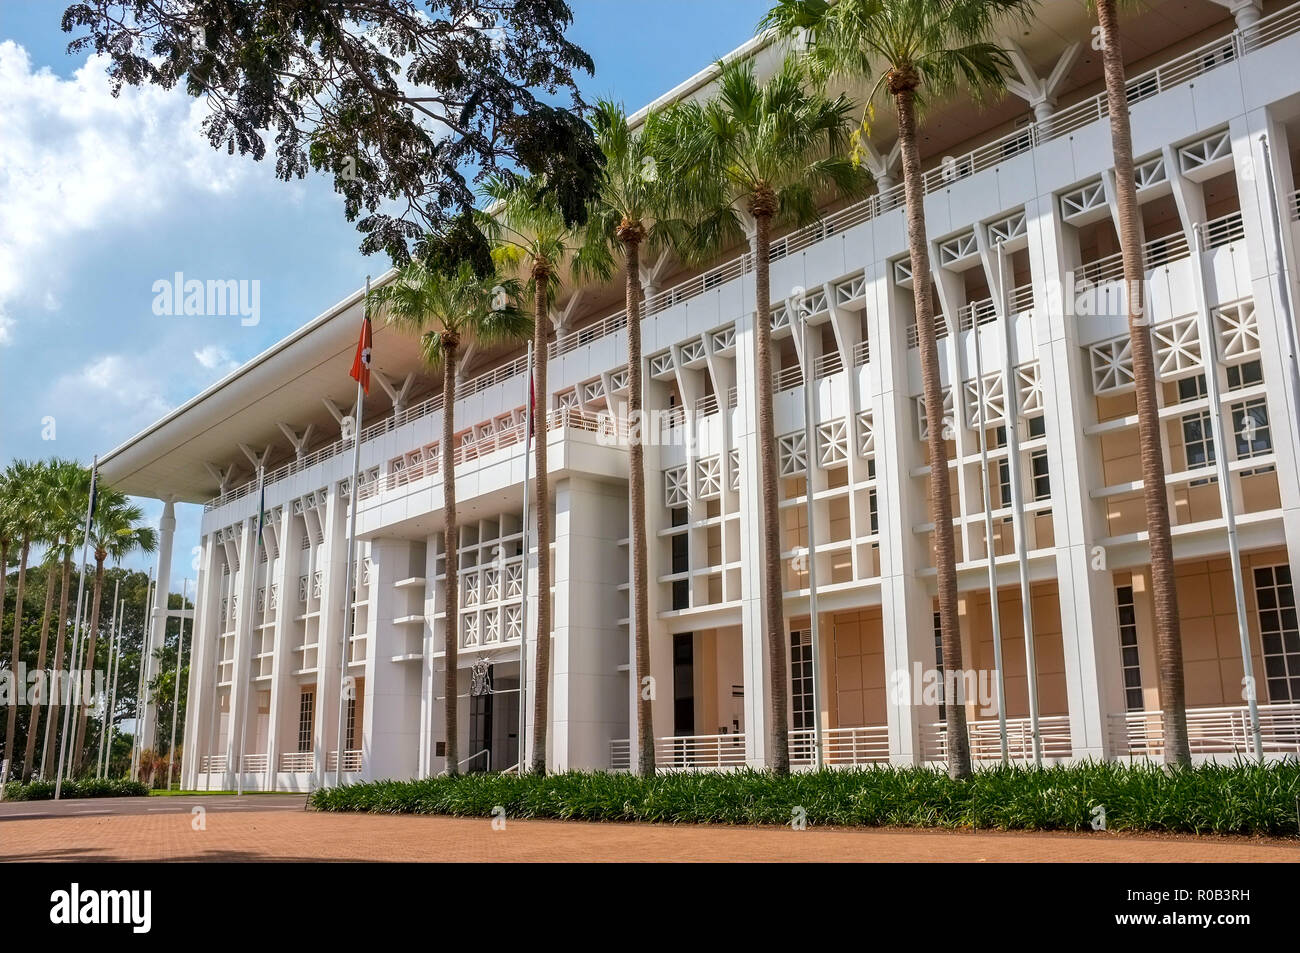 Parliament House of the Northern Territory of Australia in Darwin city, N.T Australia. Stock Photo